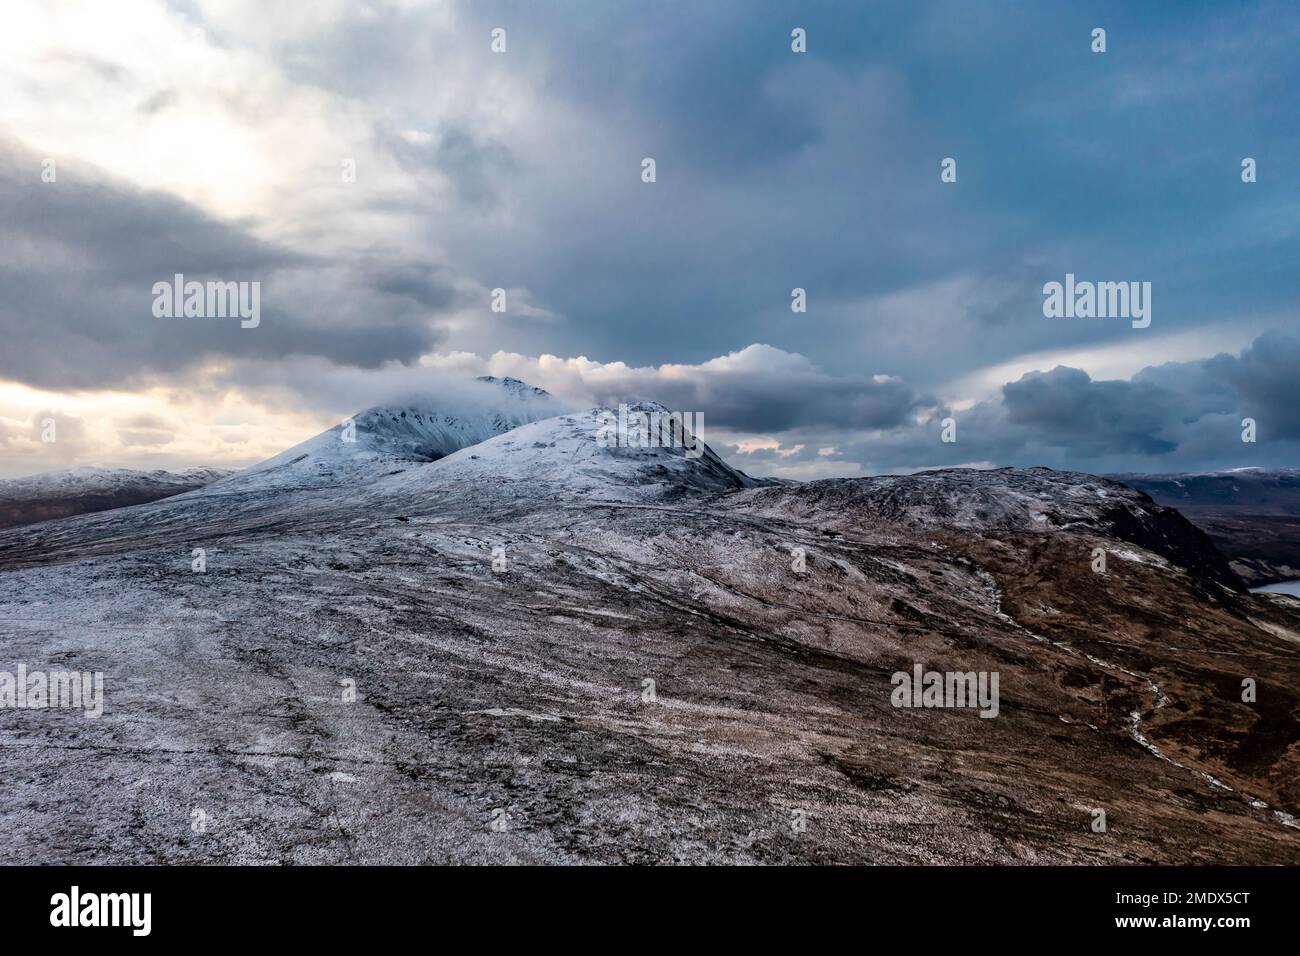 Aerial view of the snow covered Mount Errigal with dramatic clouds, the highest mountain in Donegal - Ireland Stock Photo